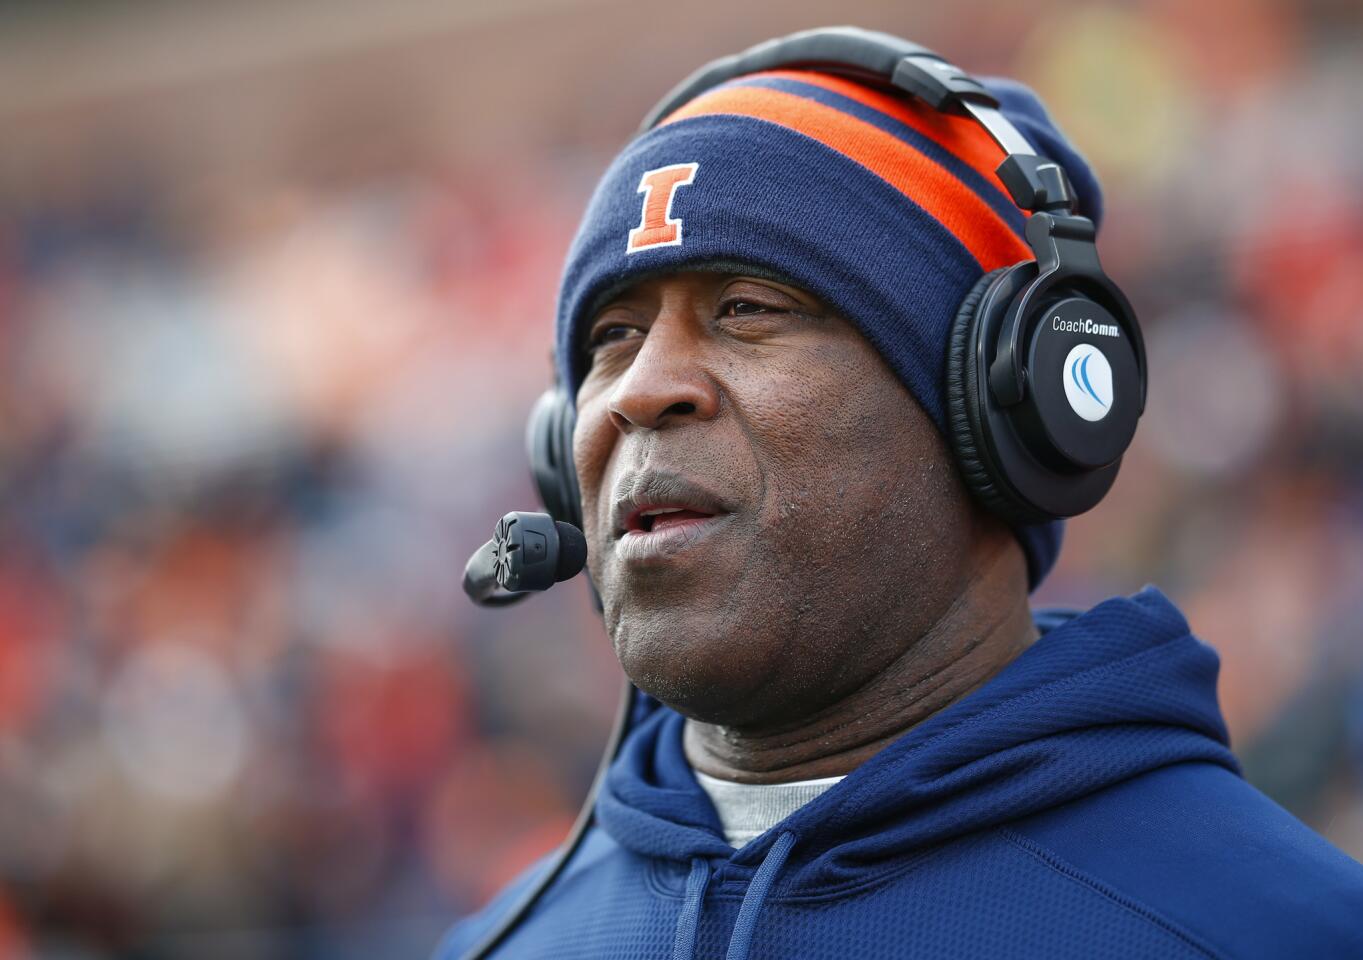 Illinois coach Lovie Smith watches the action during the game against Indiana at Memorial Stadium in Champaign on Nov. 11, 2017.